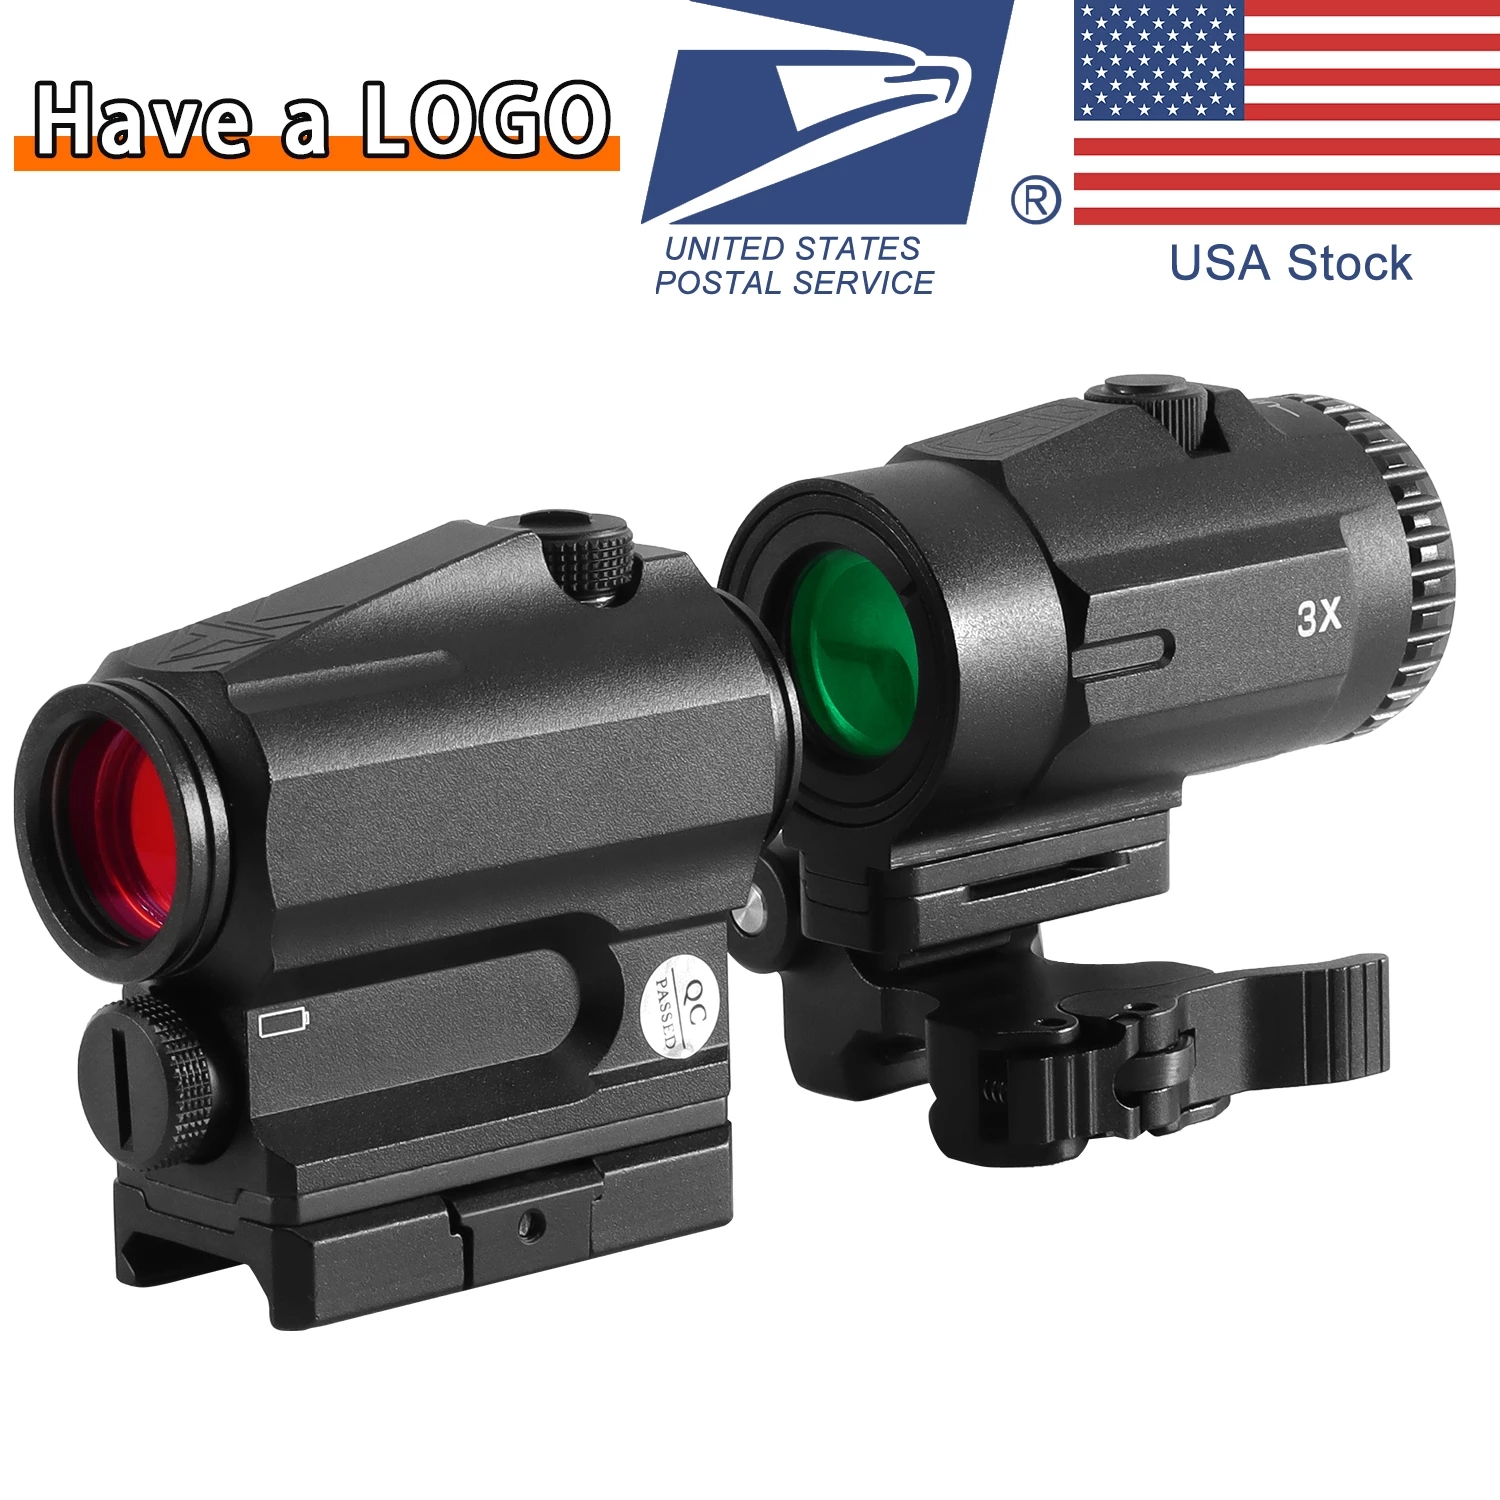 

Sparc 1X22 Collimator Holographic Scope 3X Magnification Sight Red Dot Set Reflex Sights 20Mm Rail Mounts 558 Airsoft Snipe Rifle AR-15, Black